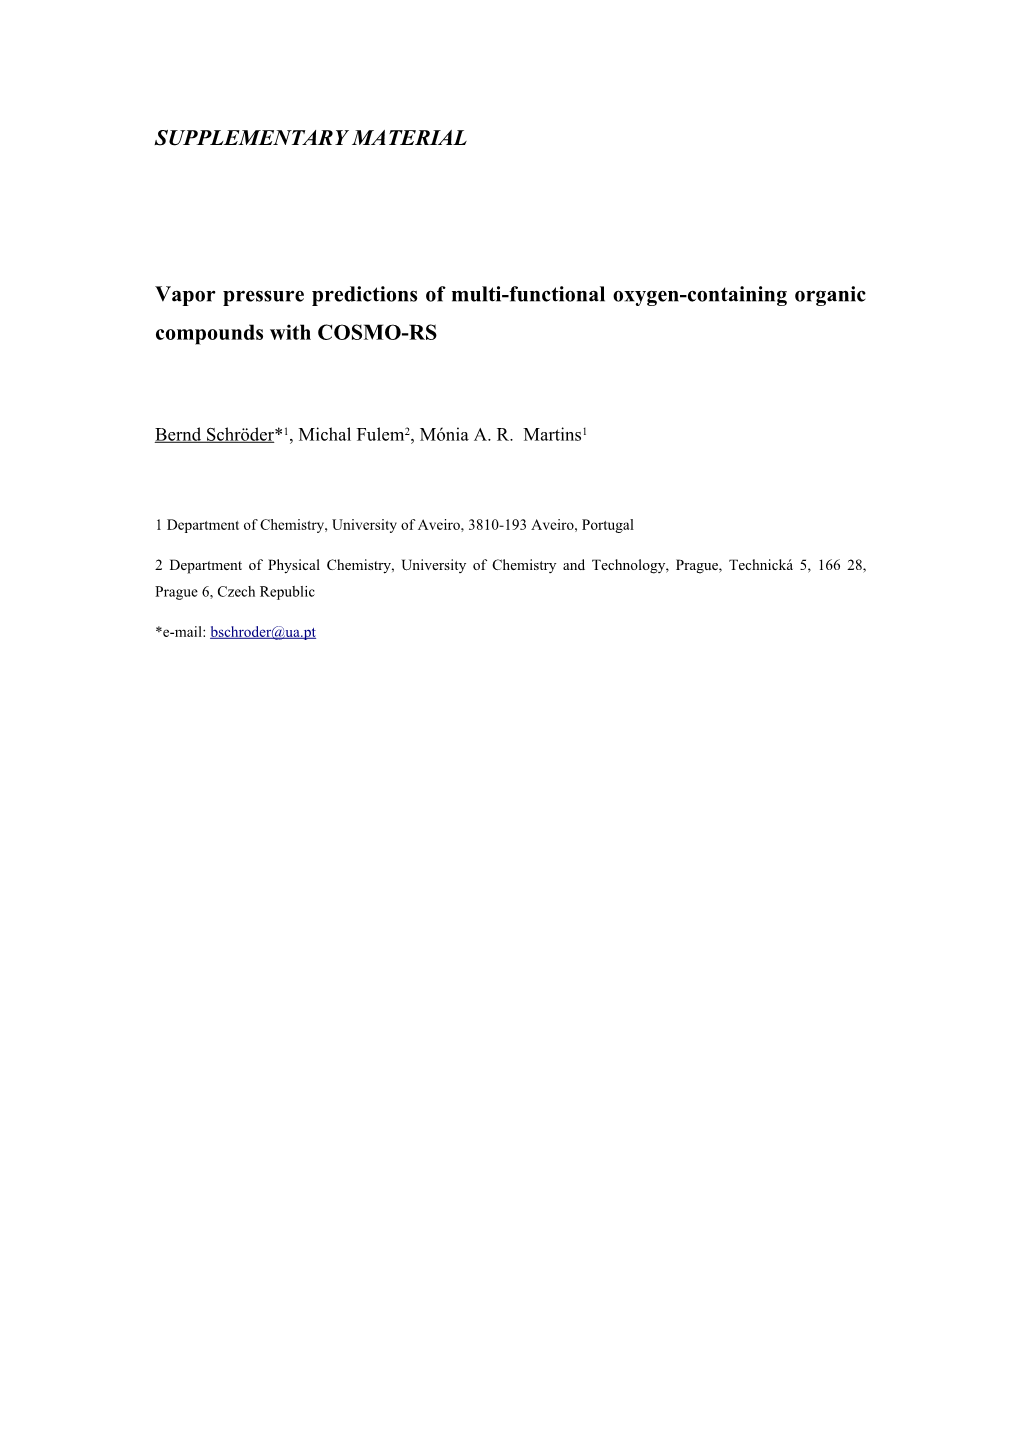 Vapor Pressure Predictions of Multi-Functional Oxygen-Containing Organic Compounds With